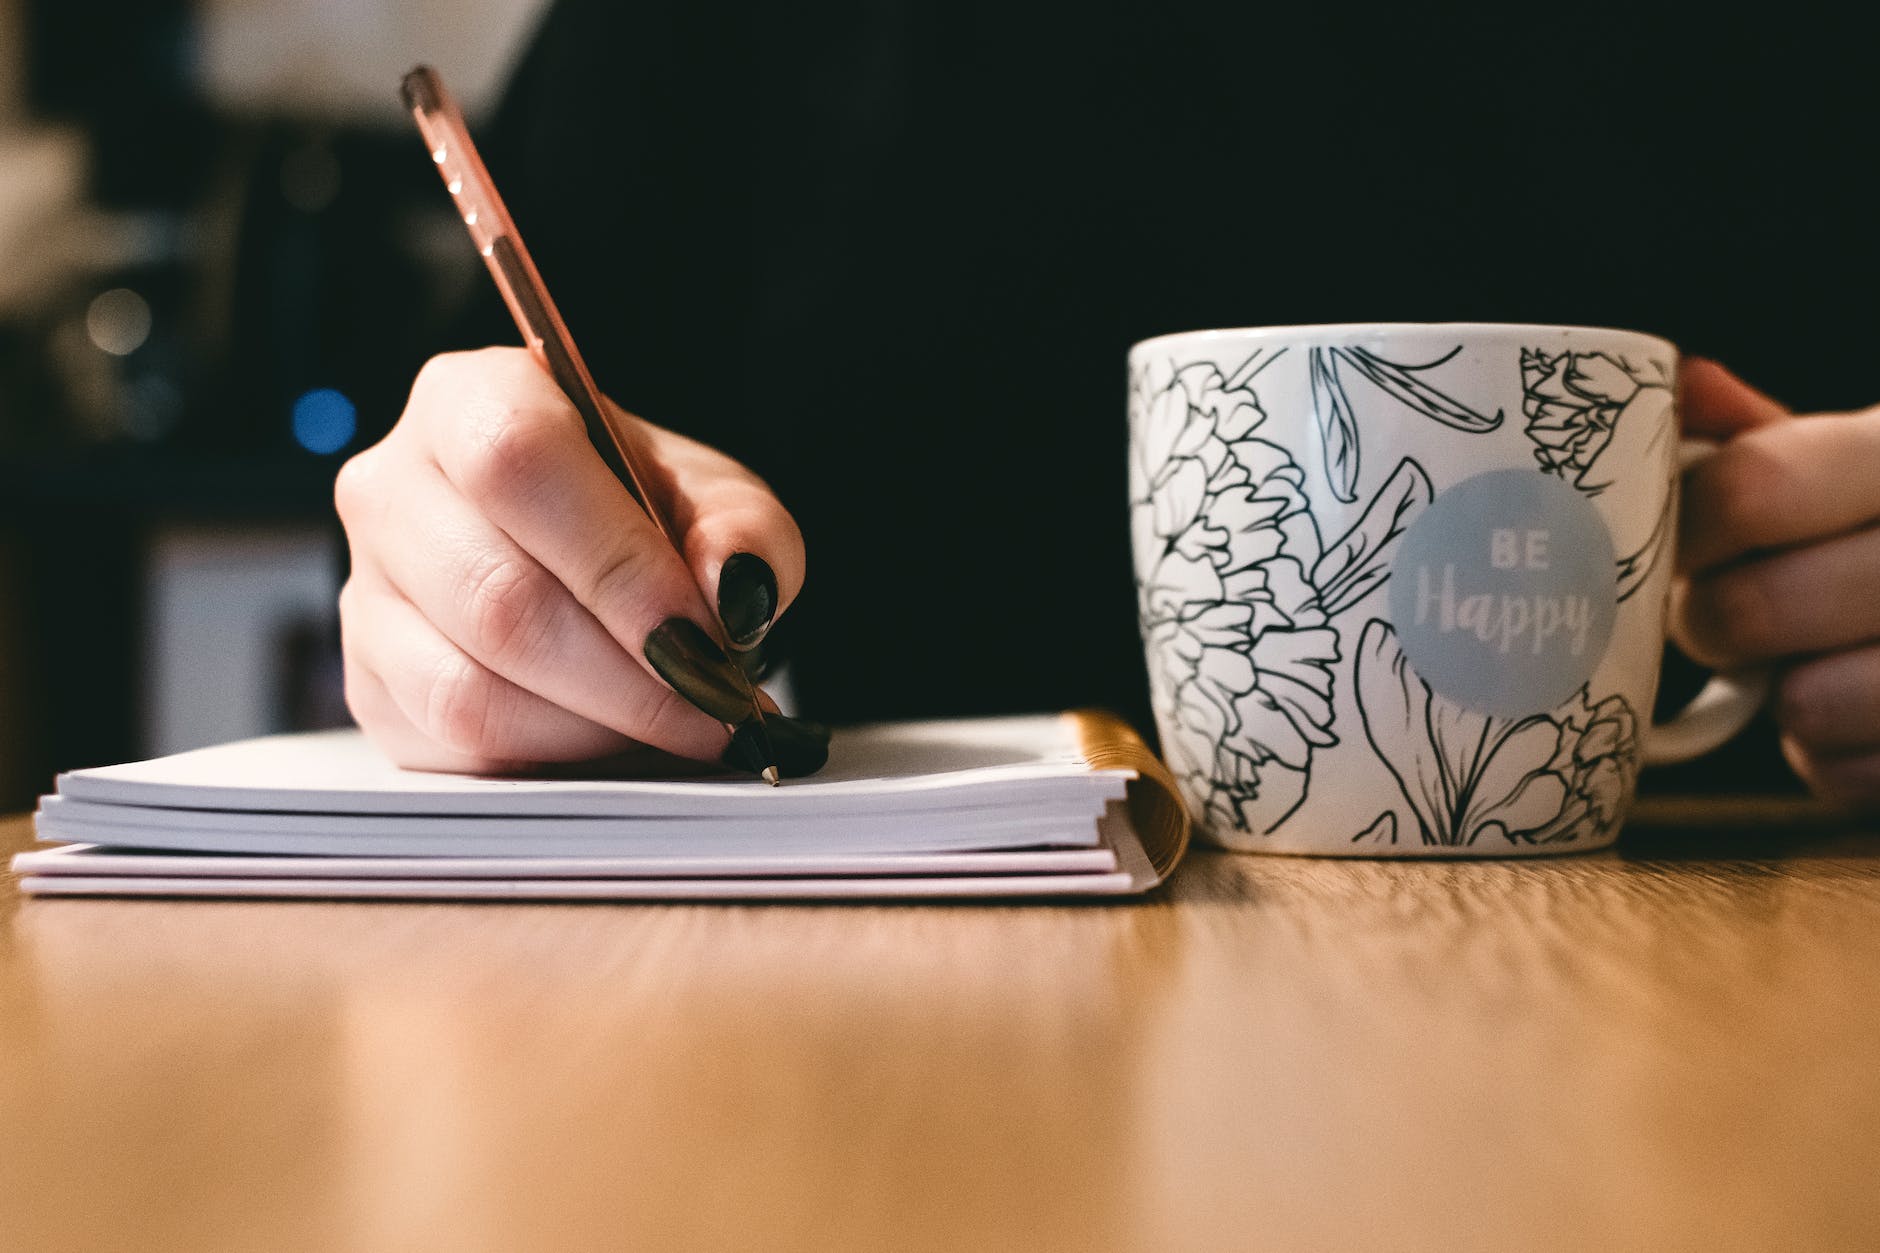 A person is holding a pen while writing on a notebook. It seems to be a woman. Her nails are painted with black nail polish. She is also holding a cup of coffee where it is written "Be happy".